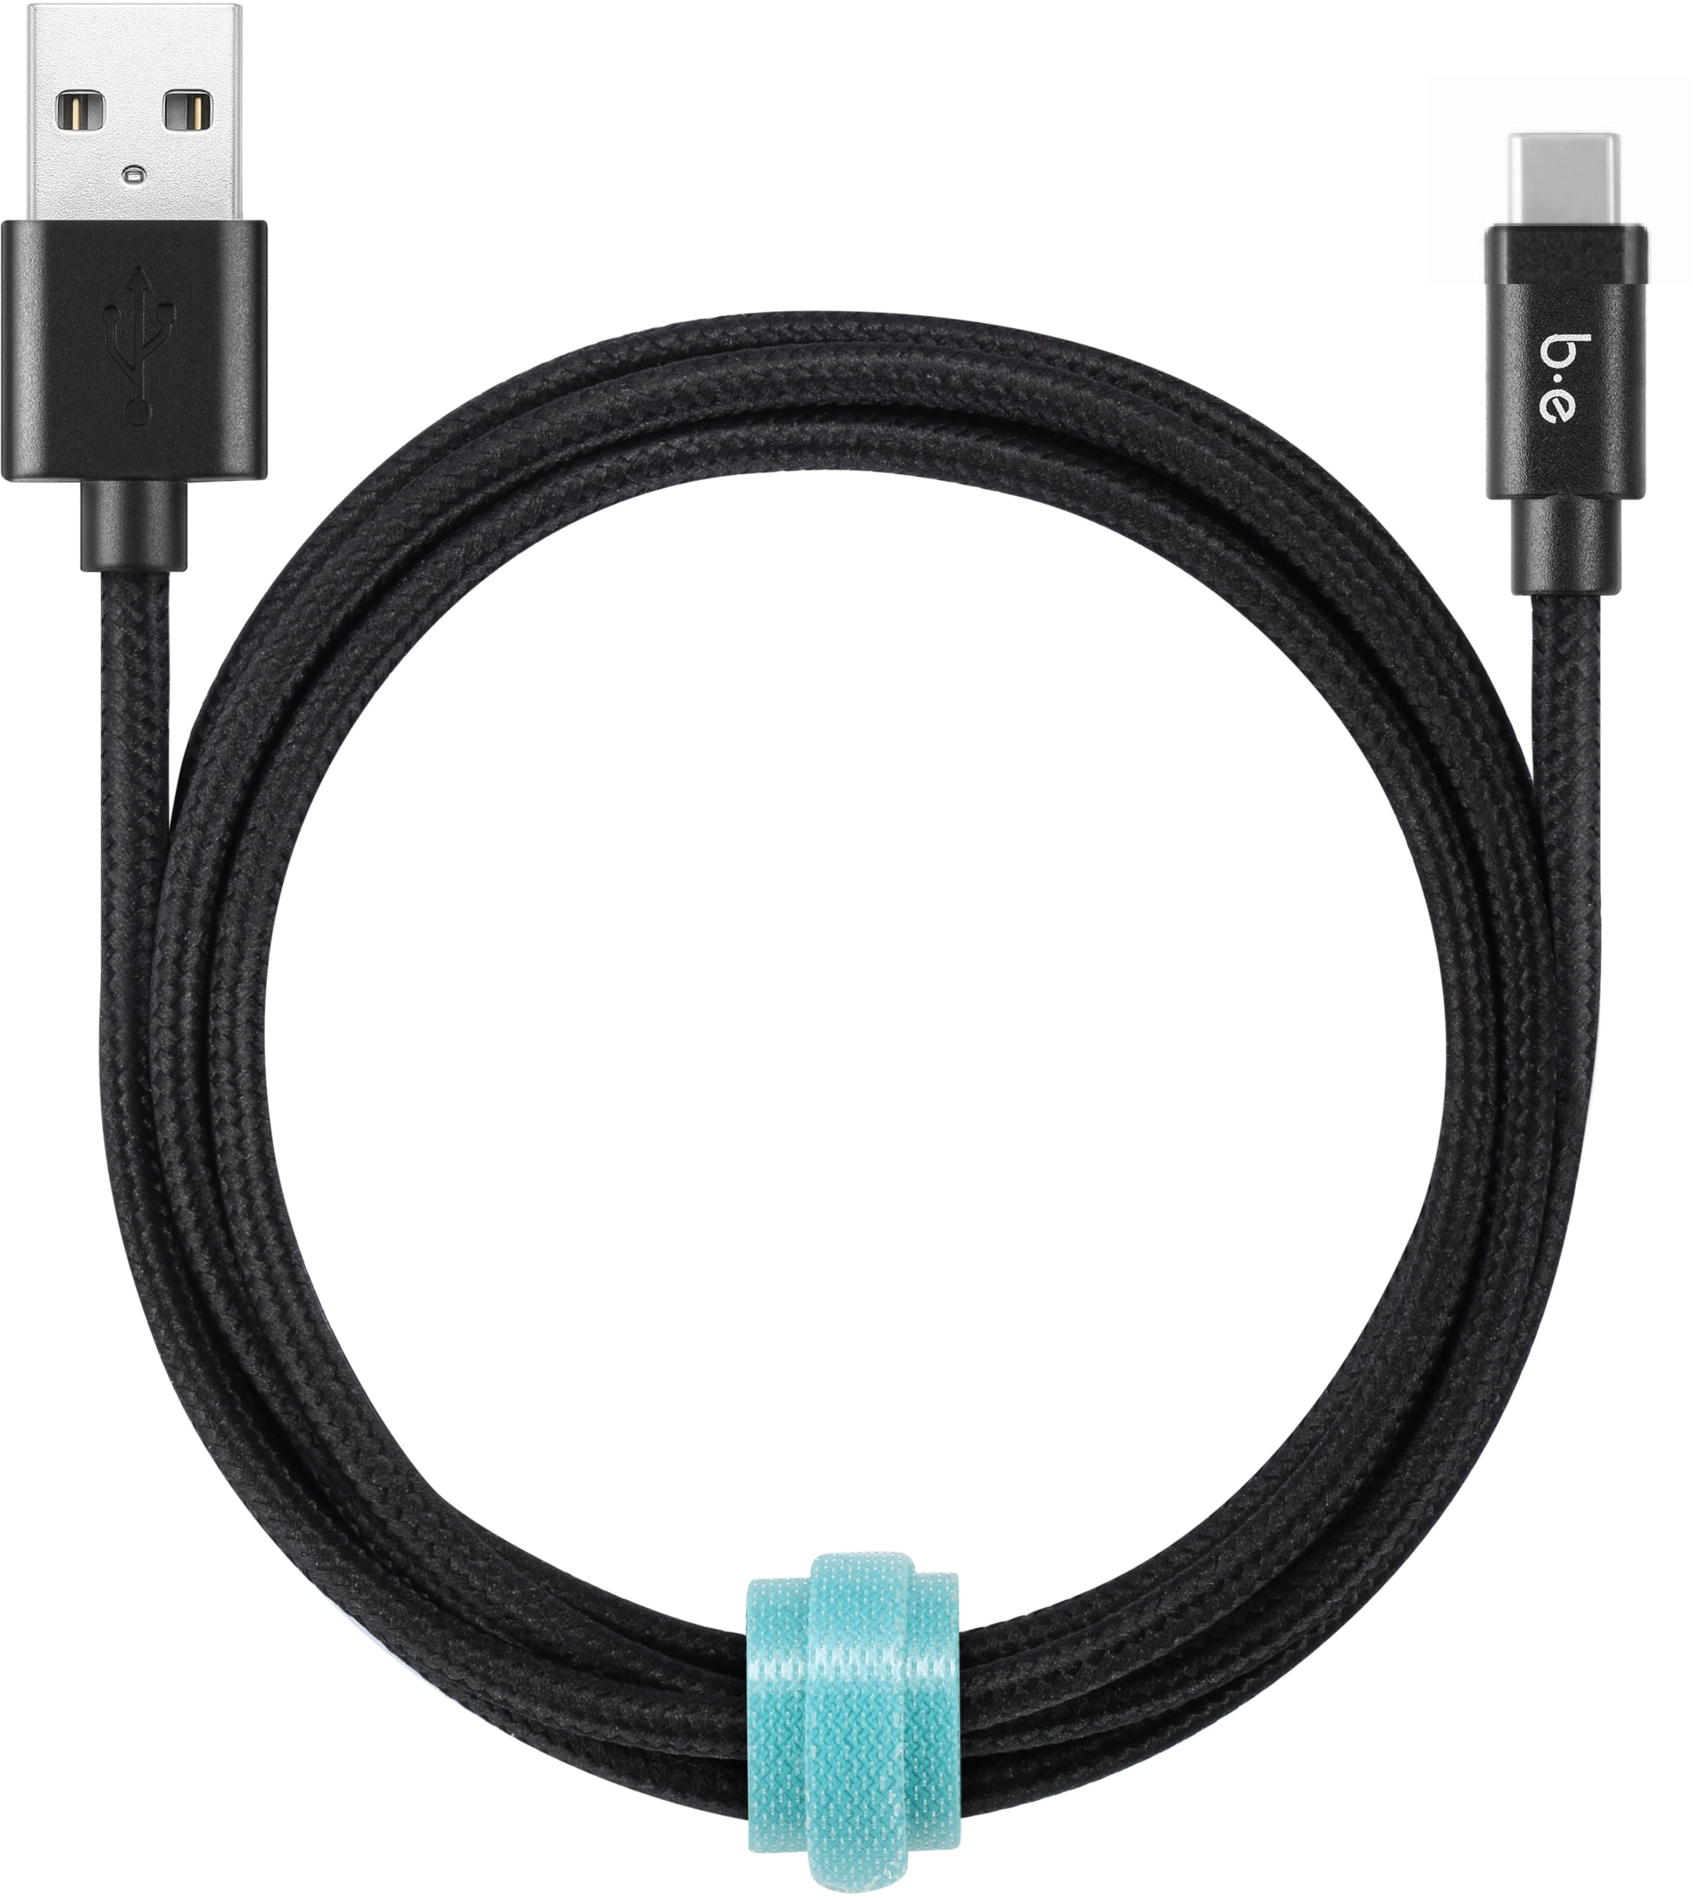 USB Type-C 6ft Braided Charge/Sync Cable - Black